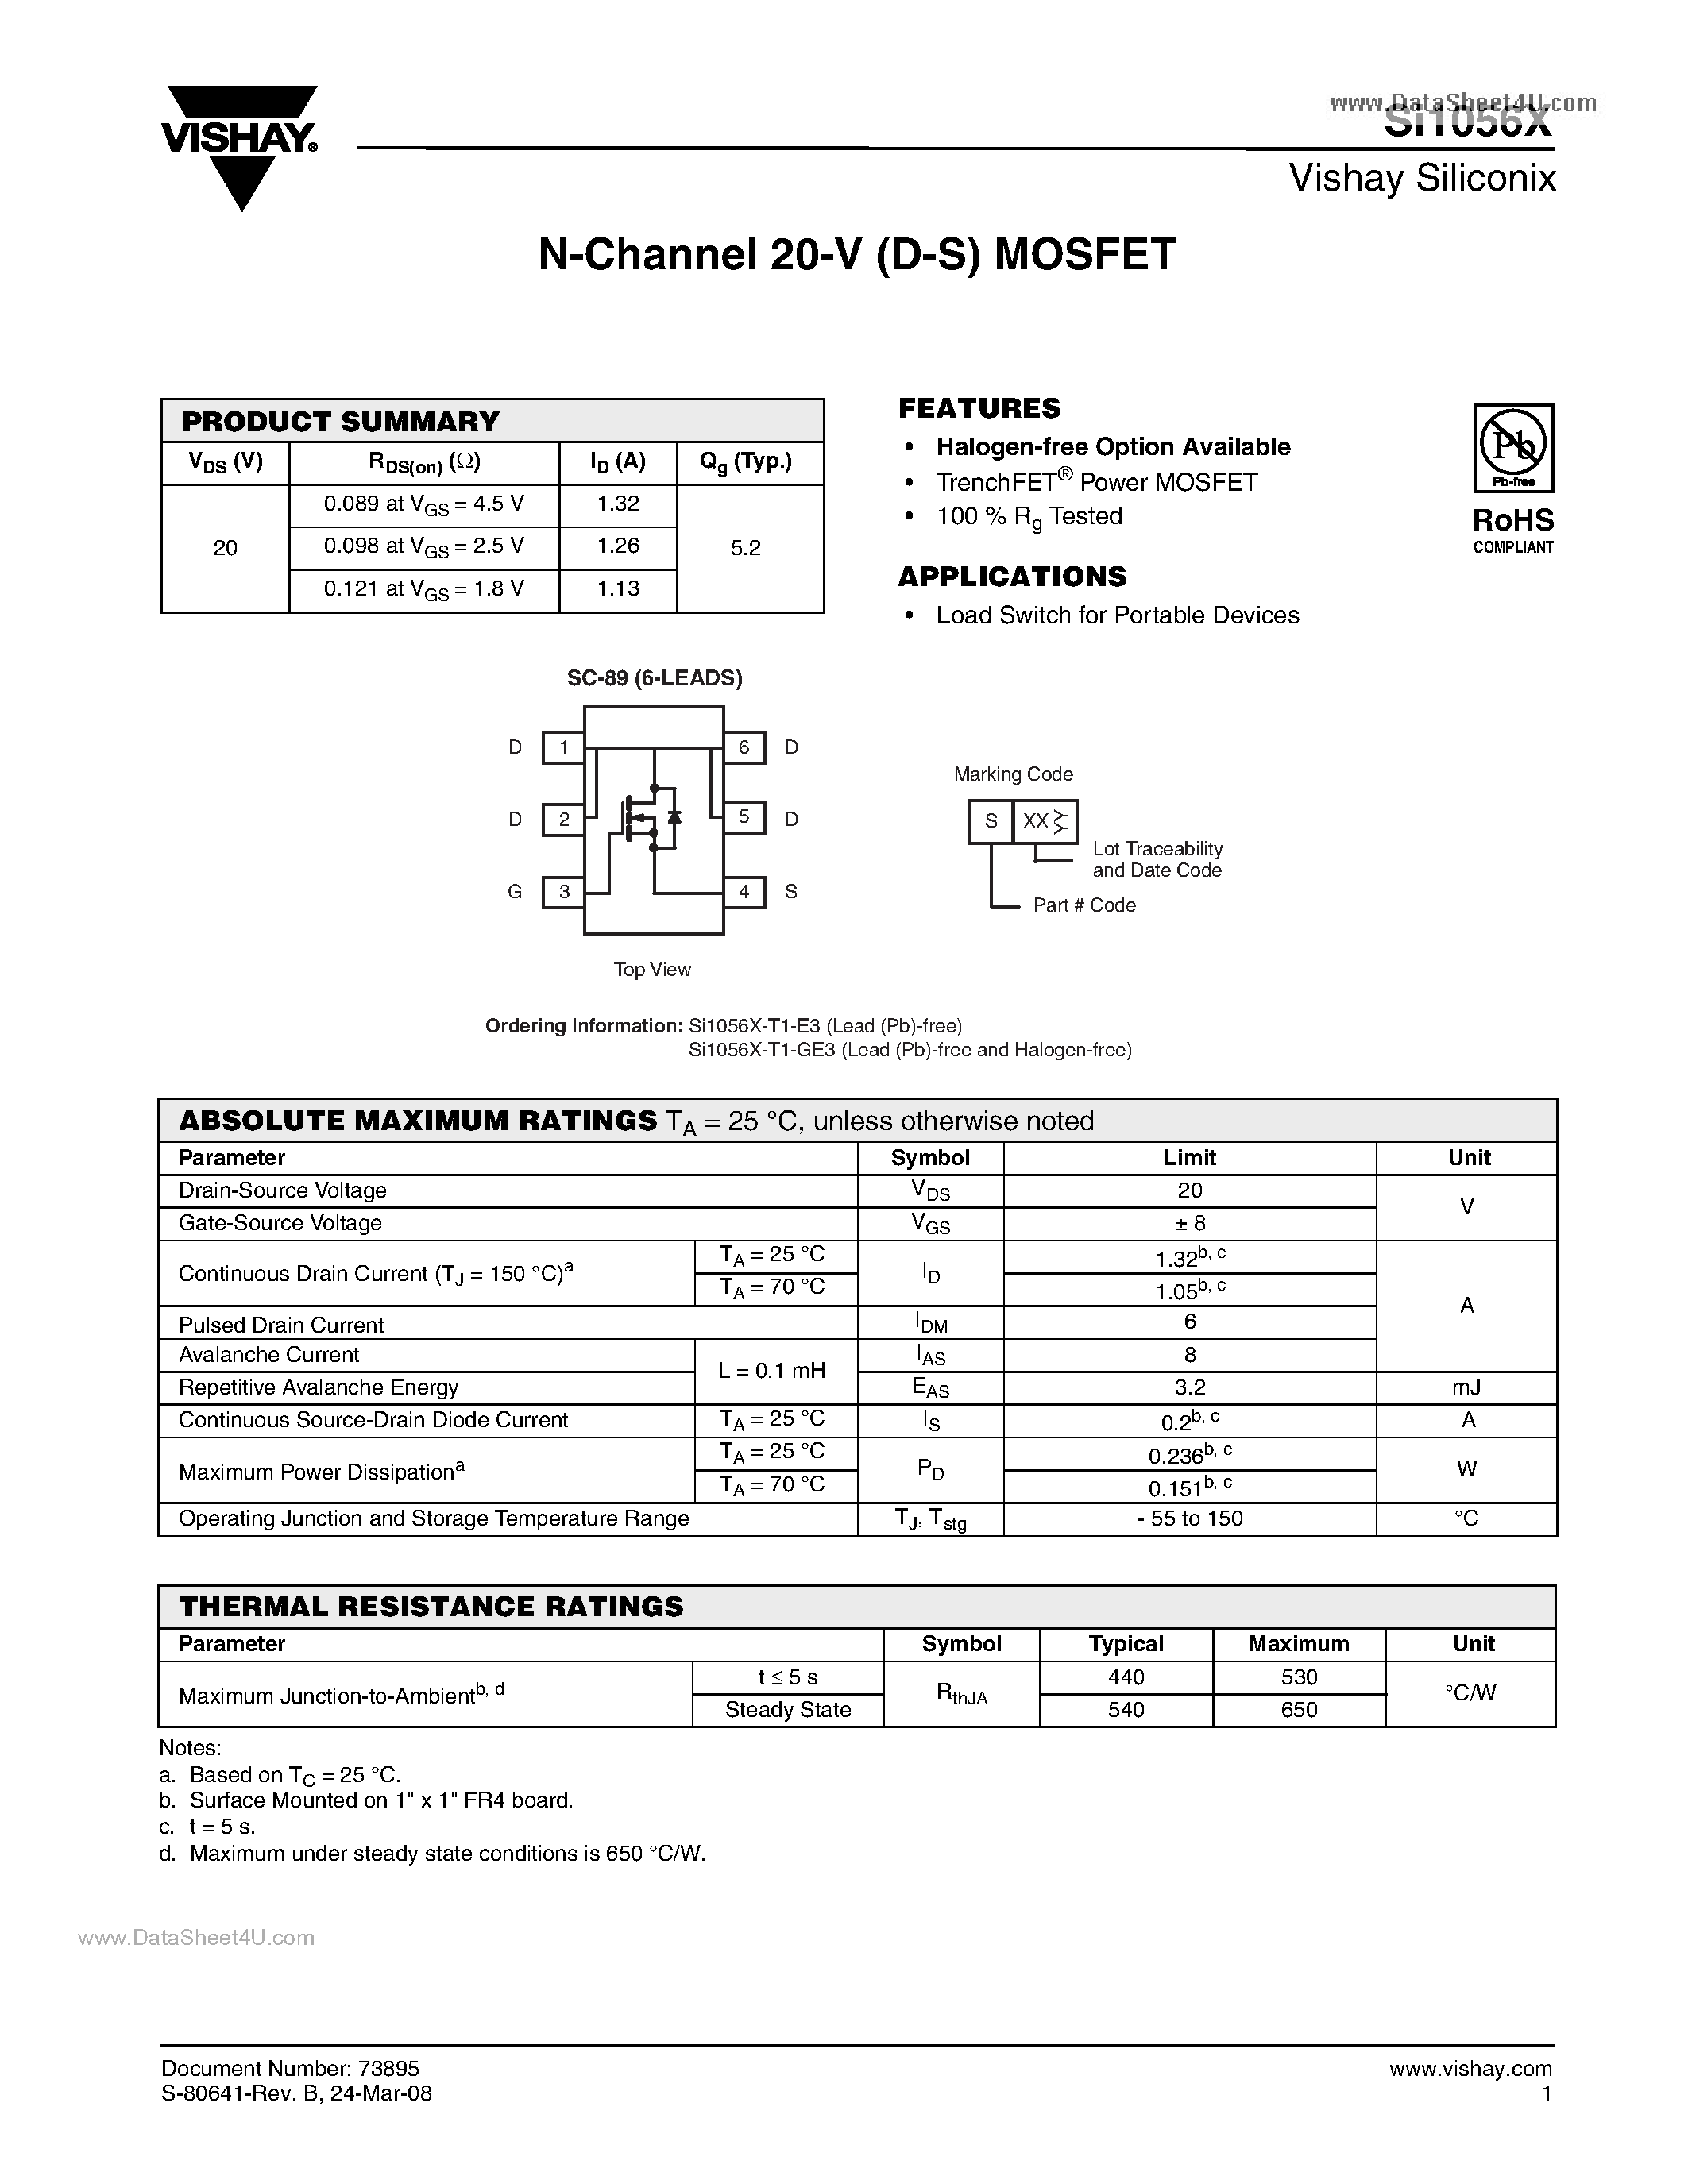 Datasheet SI1056X - N-Channel 20-V (D-S) MOSFET page 1